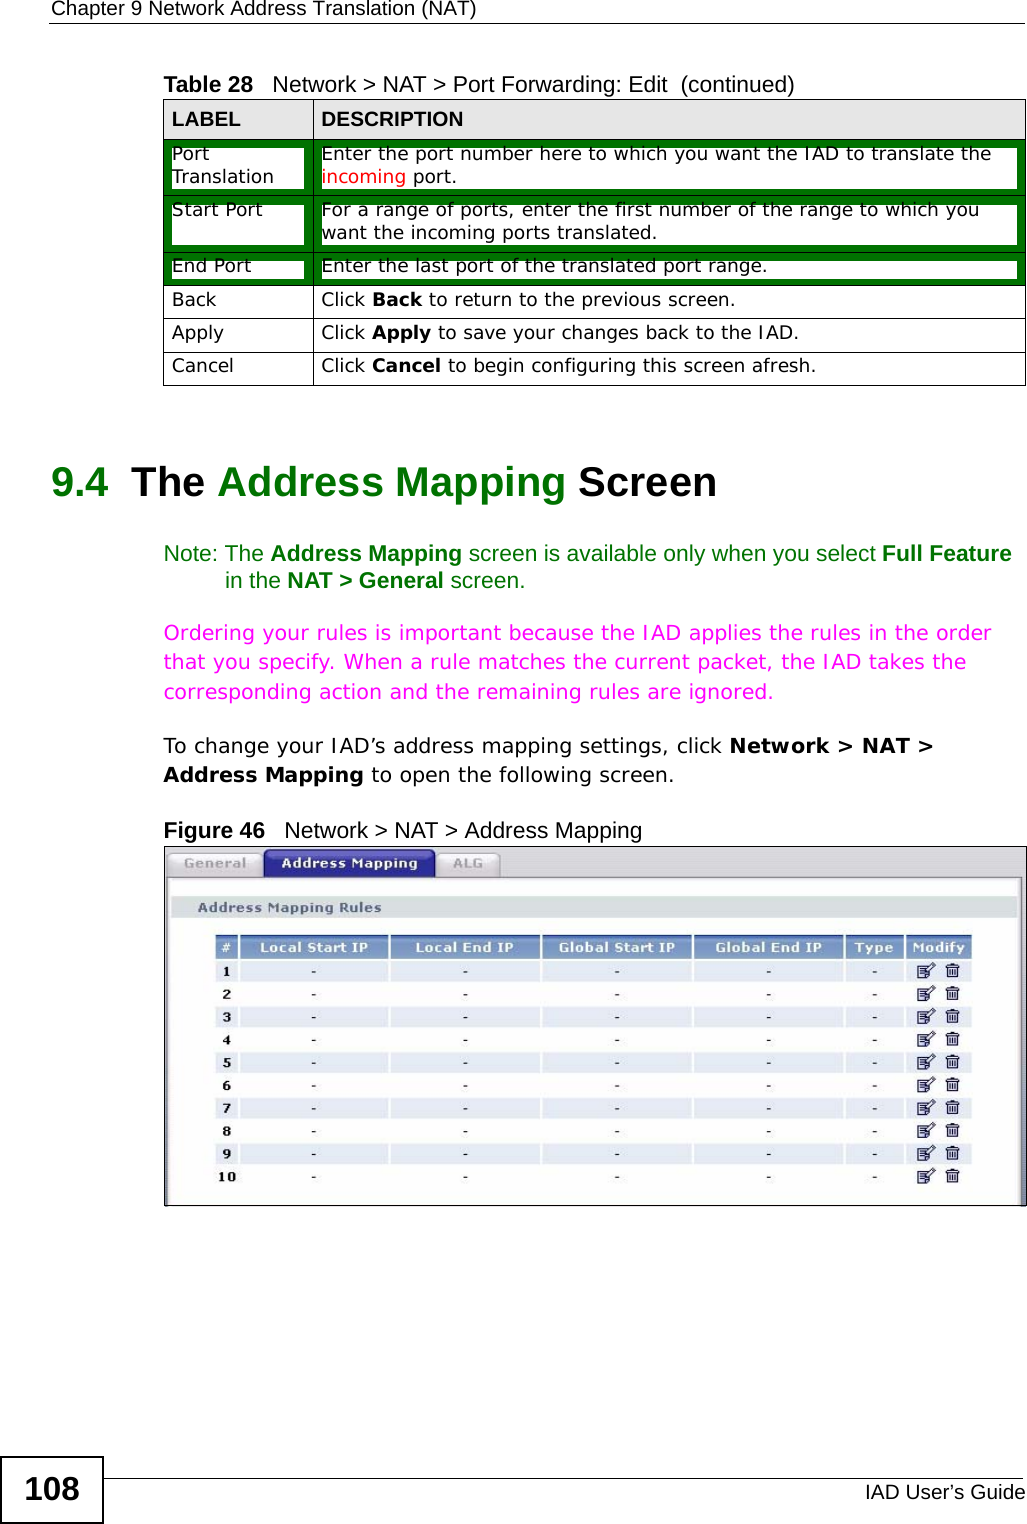 Chapter 9 Network Address Translation (NAT)IAD User’s Guide1089.4  The Address Mapping ScreenNote: The Address Mapping screen is available only when you select Full Feature in the NAT &gt; General screen.Ordering your rules is important because the IAD applies the rules in the order that you specify. When a rule matches the current packet, the IAD takes the corresponding action and the remaining rules are ignored. To change your IAD’s address mapping settings, click Network &gt; NAT &gt; Address Mapping to open the following screen.Figure 46   Network &gt; NAT &gt; Address MappingPort Translation Enter the port number here to which you want the IAD to translate the incoming port. Start Port For a range of ports, enter the first number of the range to which you want the incoming ports translated.End Port  Enter the last port of the translated port range.Back Click Back to return to the previous screen.Apply Click Apply to save your changes back to the IAD.Cancel Click Cancel to begin configuring this screen afresh.Table 28   Network &gt; NAT &gt; Port Forwarding: Edit  (continued)LABEL DESCRIPTION